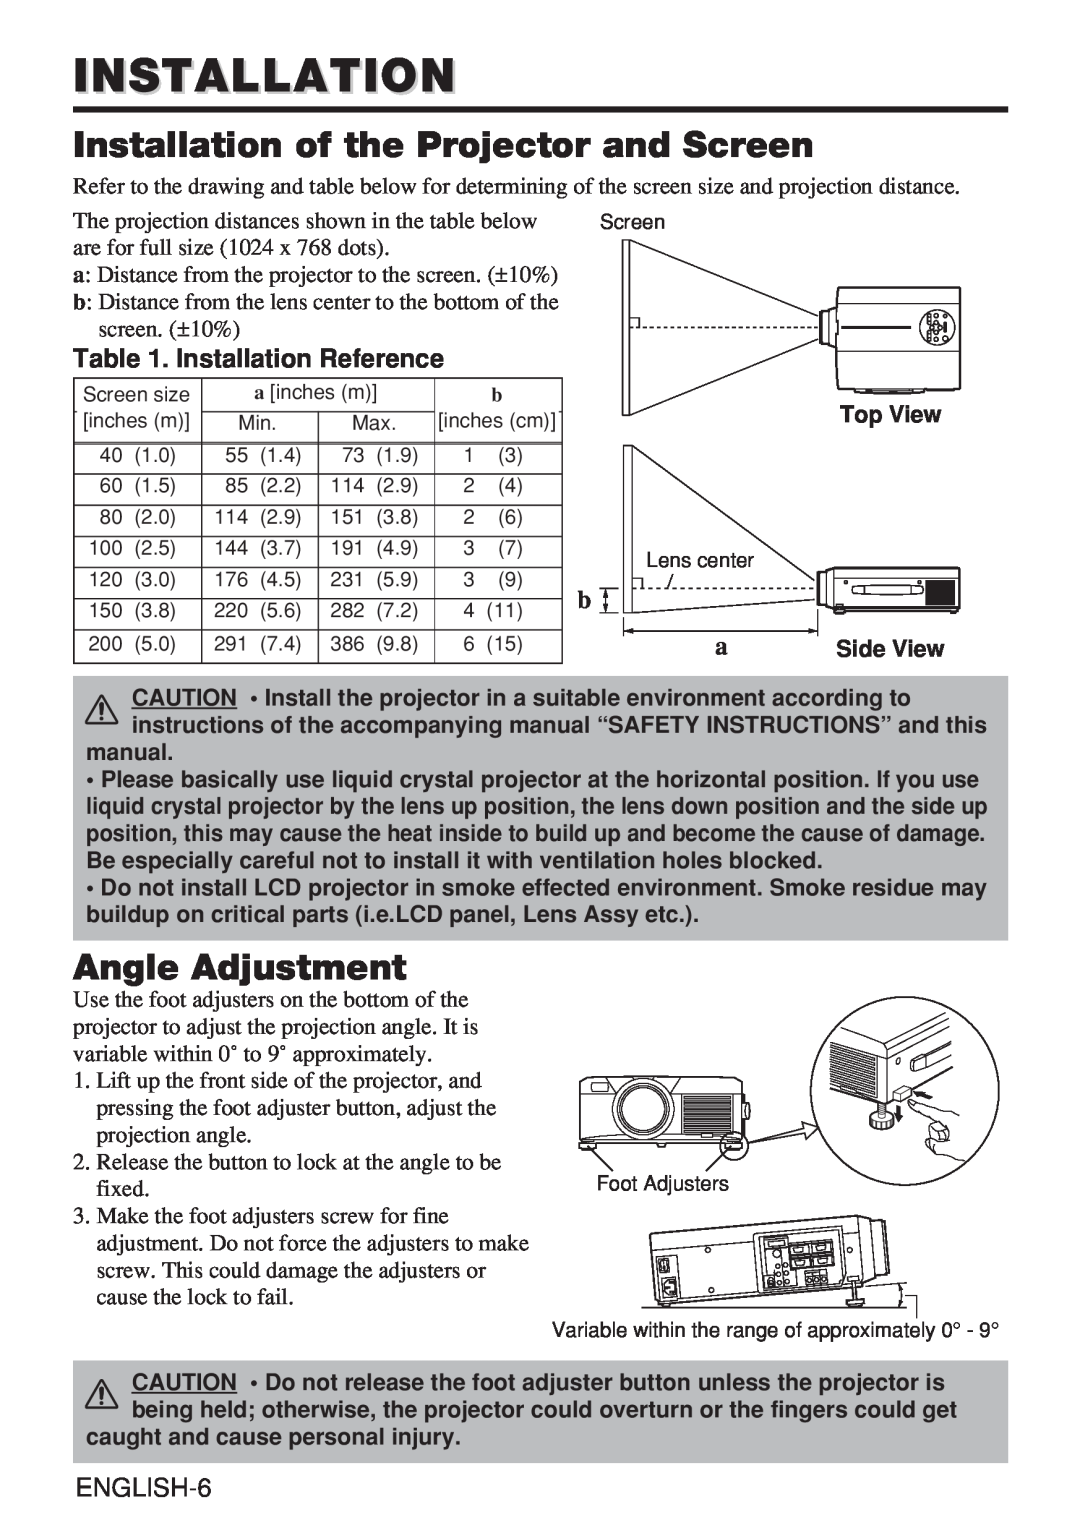 Hitachi CP-X985W user manual Installation of the Projector and Screen, Angle Adjustment, Installation Reference 